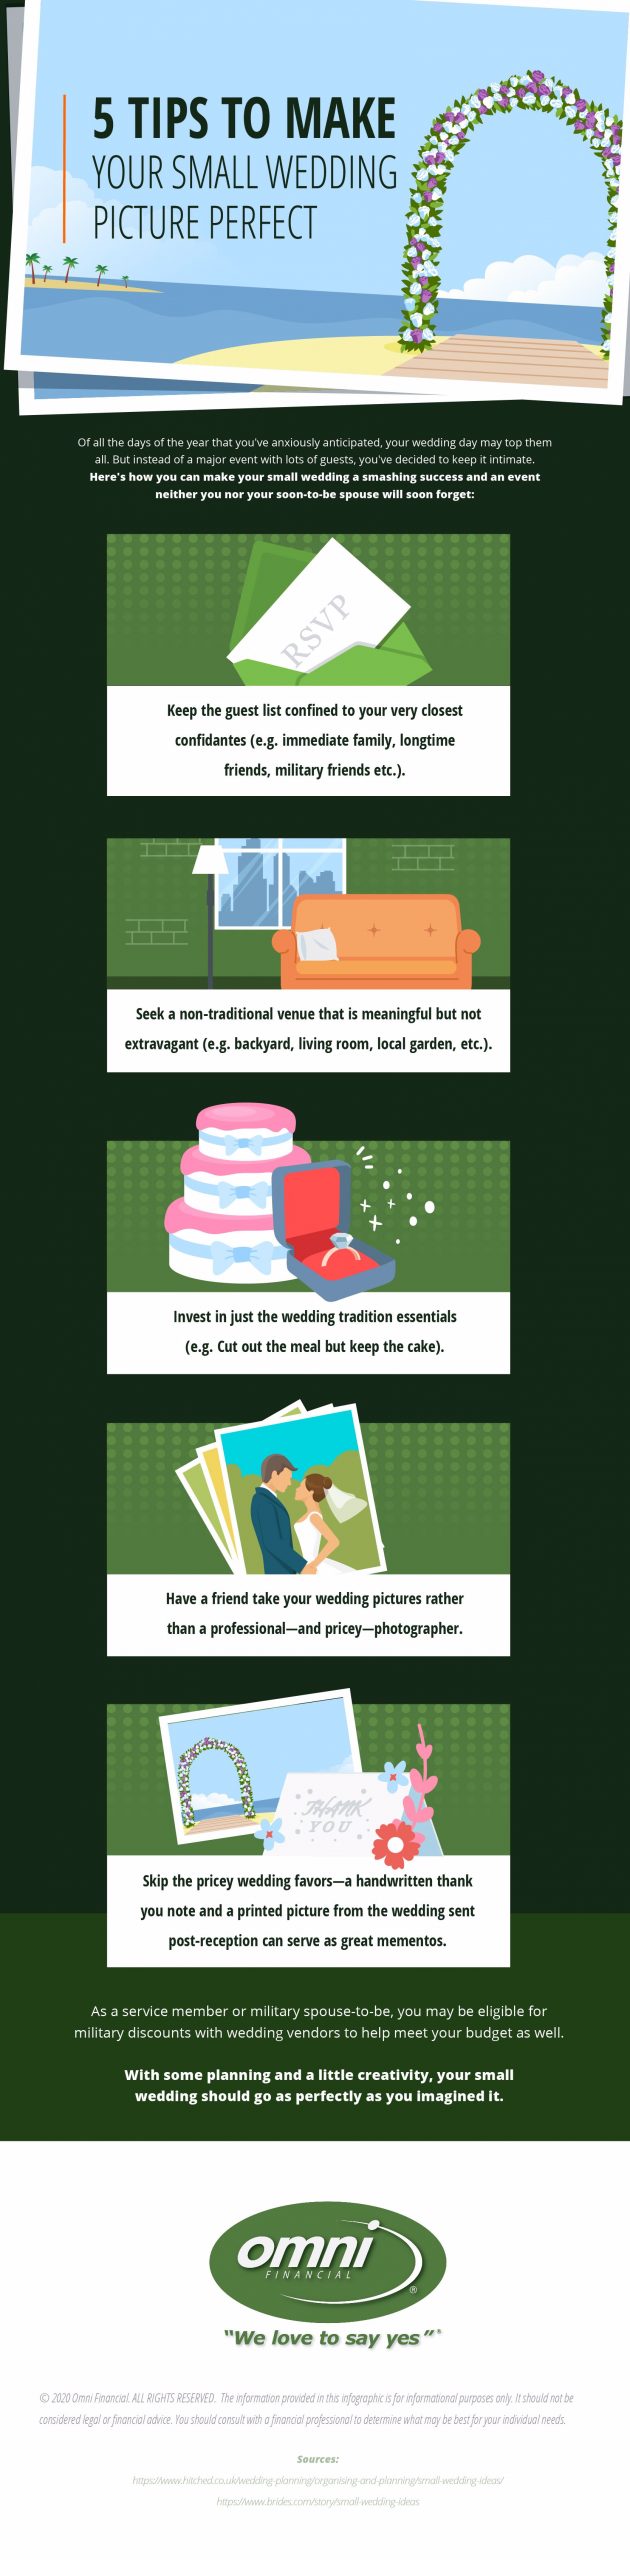 Infographic with tips on how to make a small wedding special